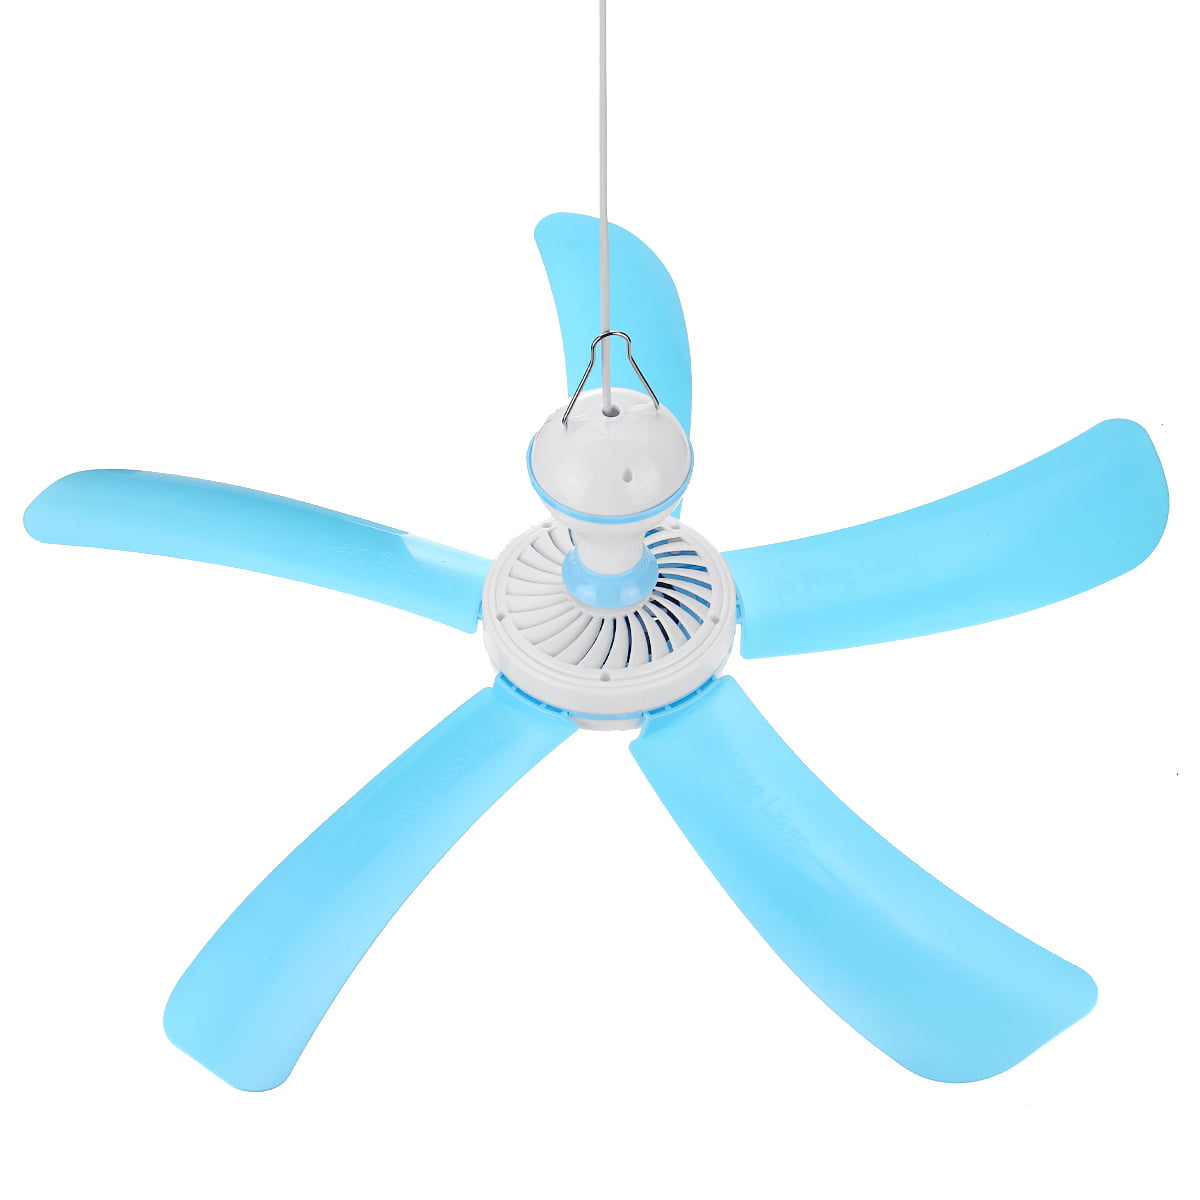 16.5" PORTABLE 5 BLADE MINI CEILING FAN EASY TO HANG CORDED PLUG NO HARD WIRING 